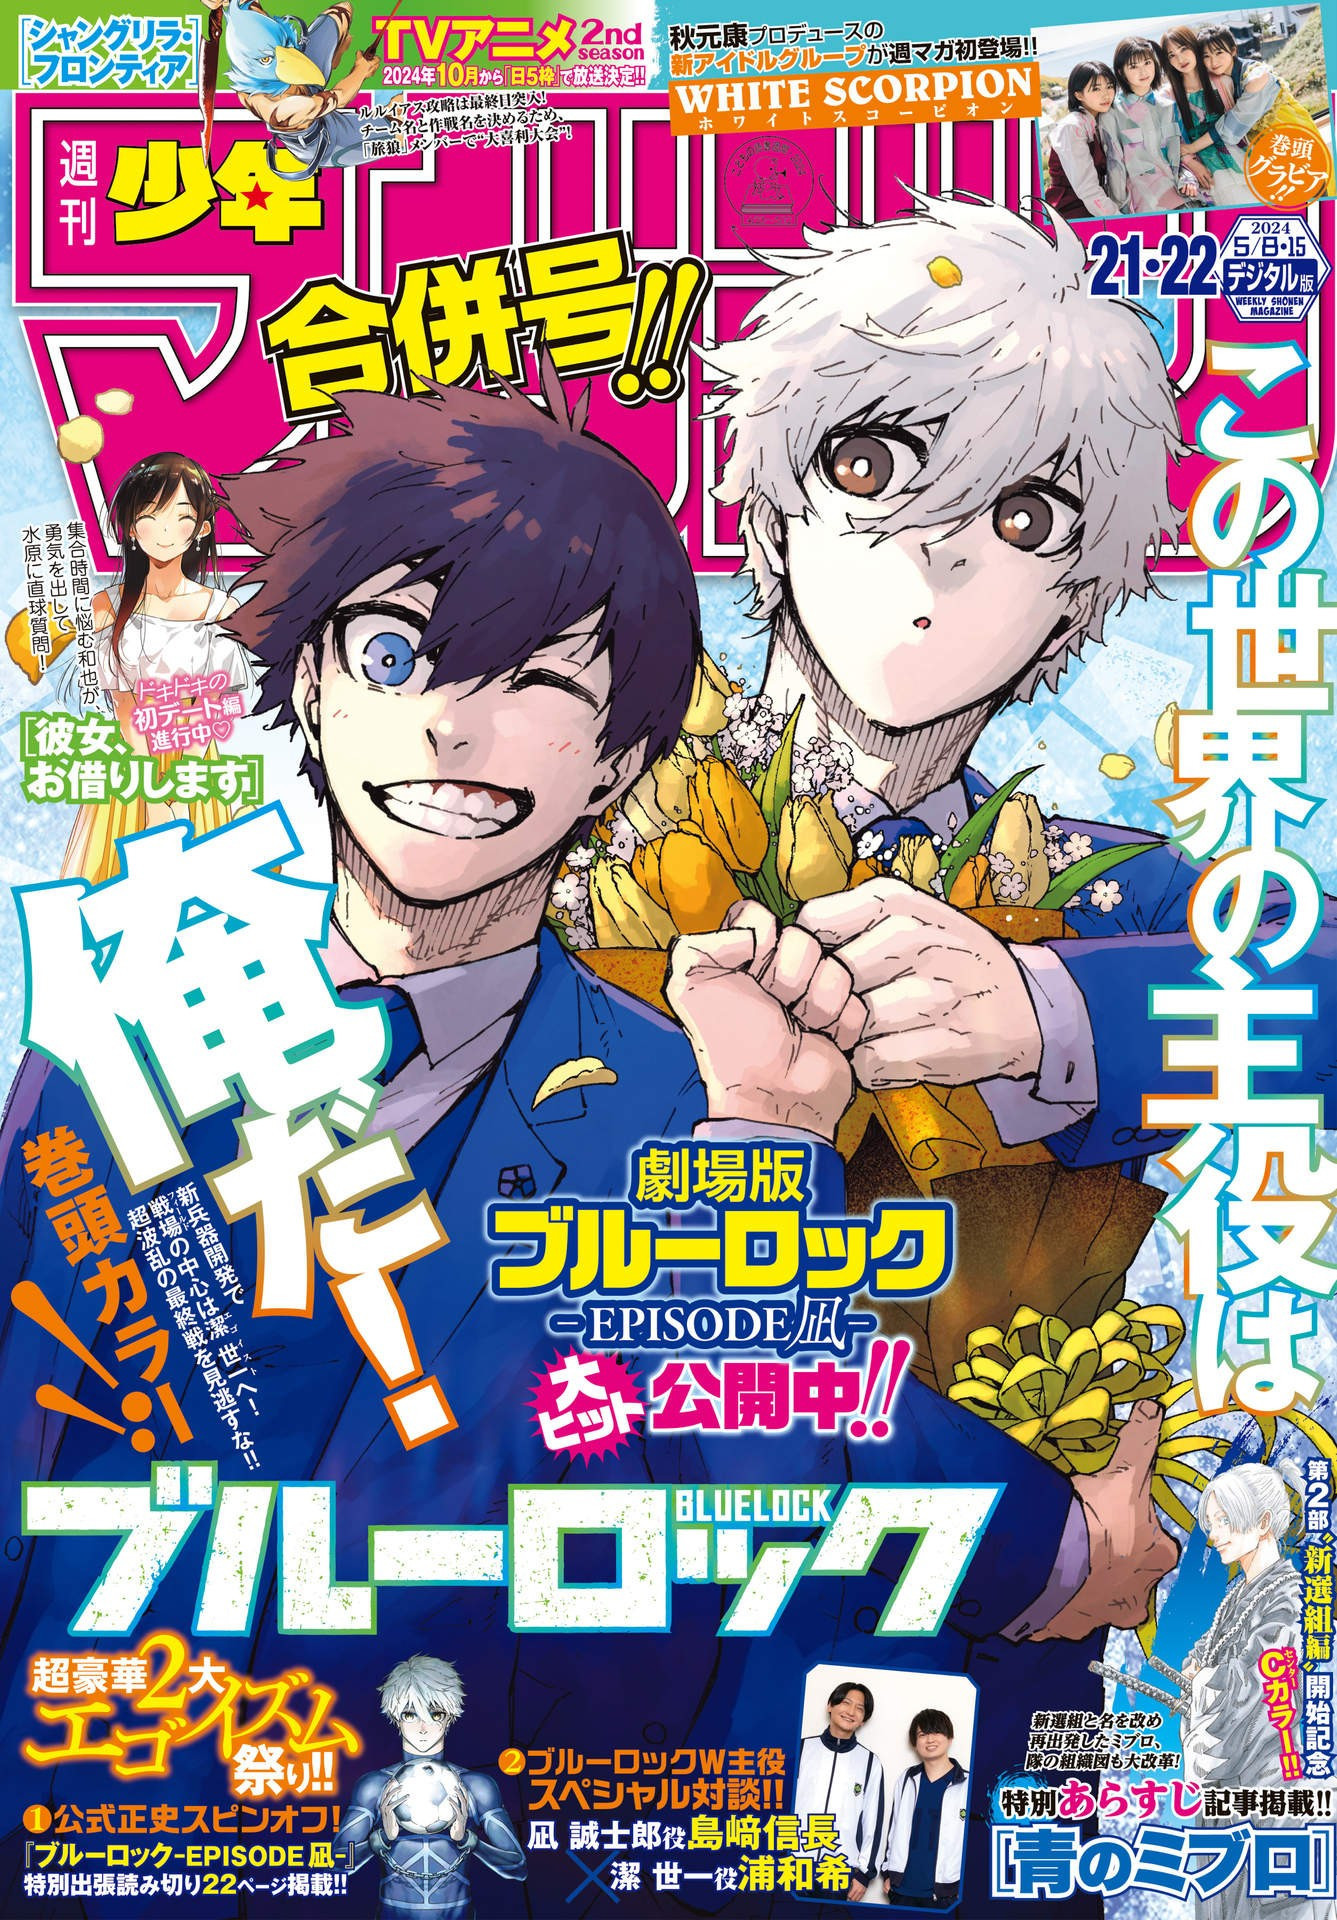 Weekly Shōnen Magazine - 週刊少年マガジン - Chapter 2024-21-22 - Page 1